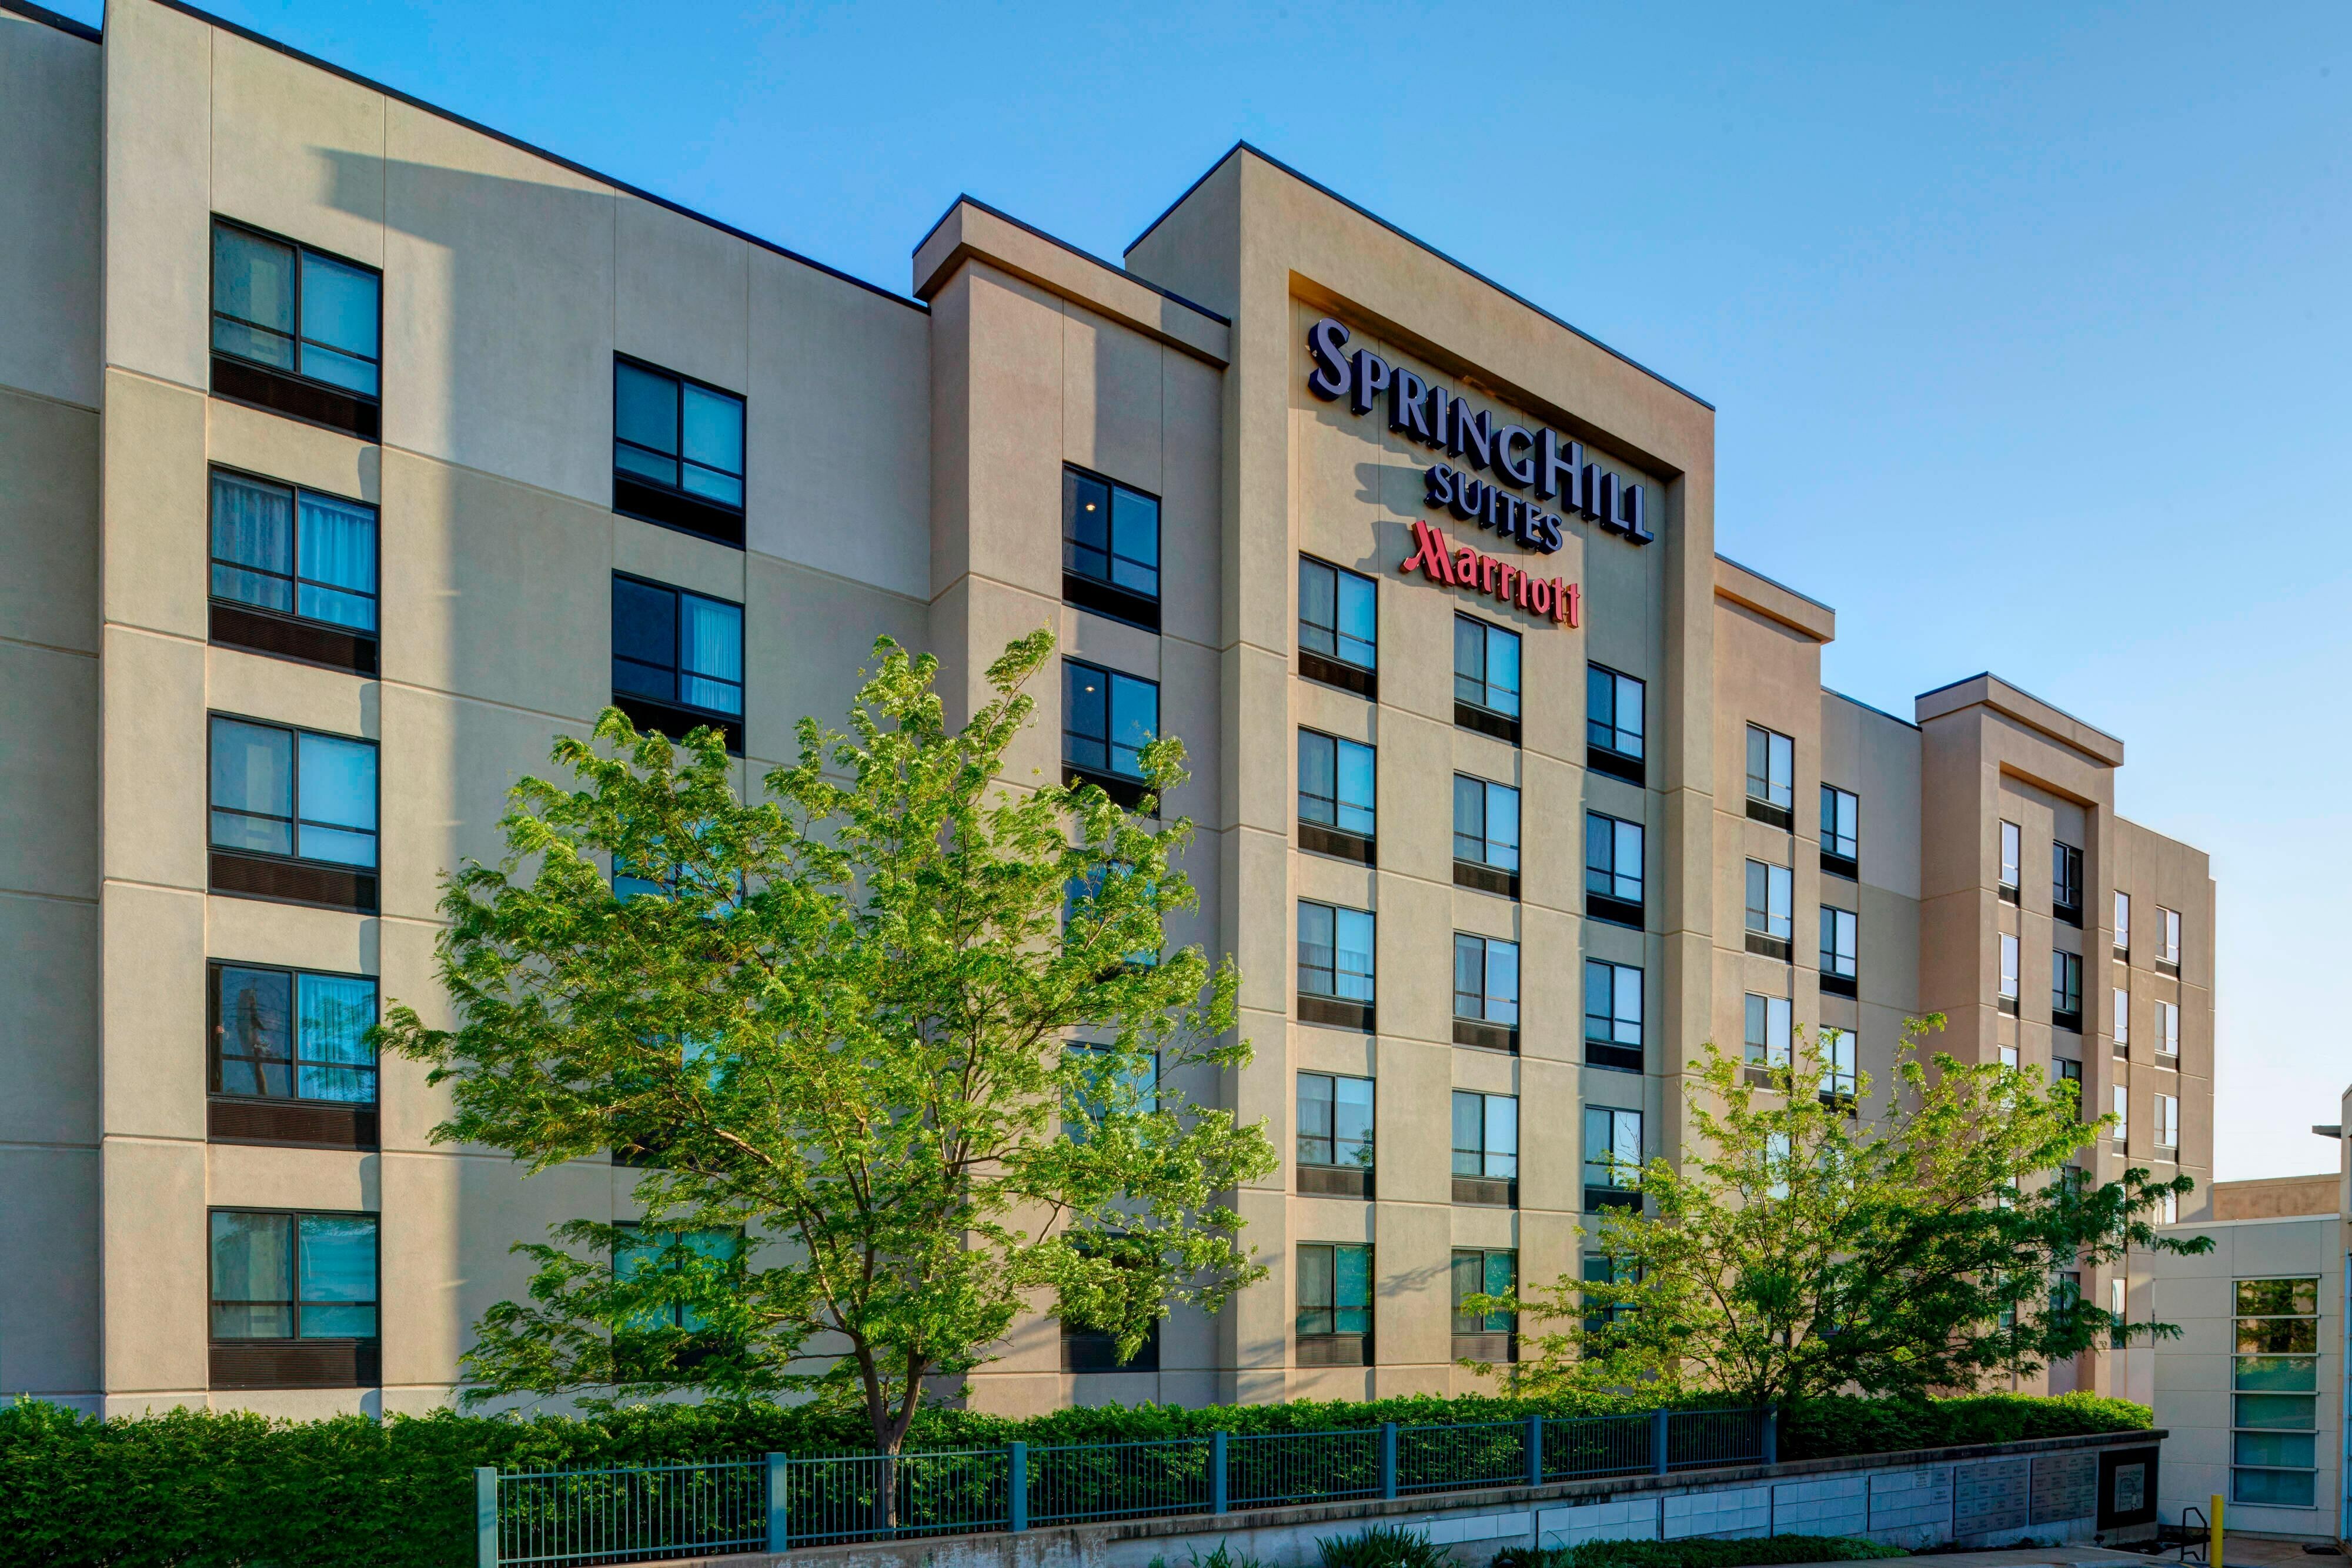 Photo of SpringHill Suites St. Louis Brentwood, Brentwood, MO